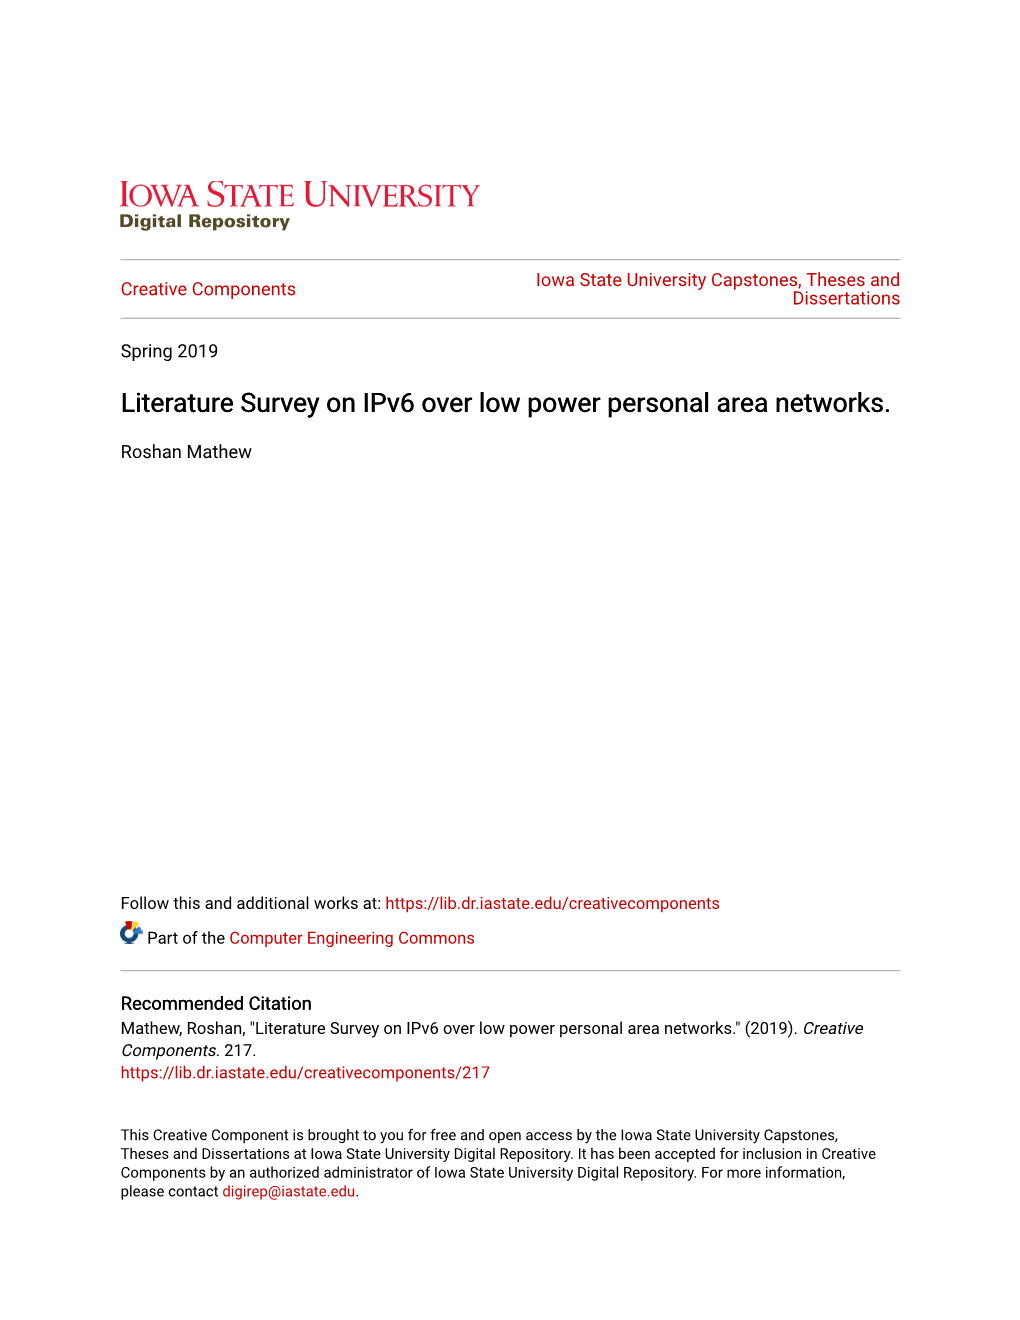 Literature Survey on Ipv6 Over Low Power Personal Area Networks